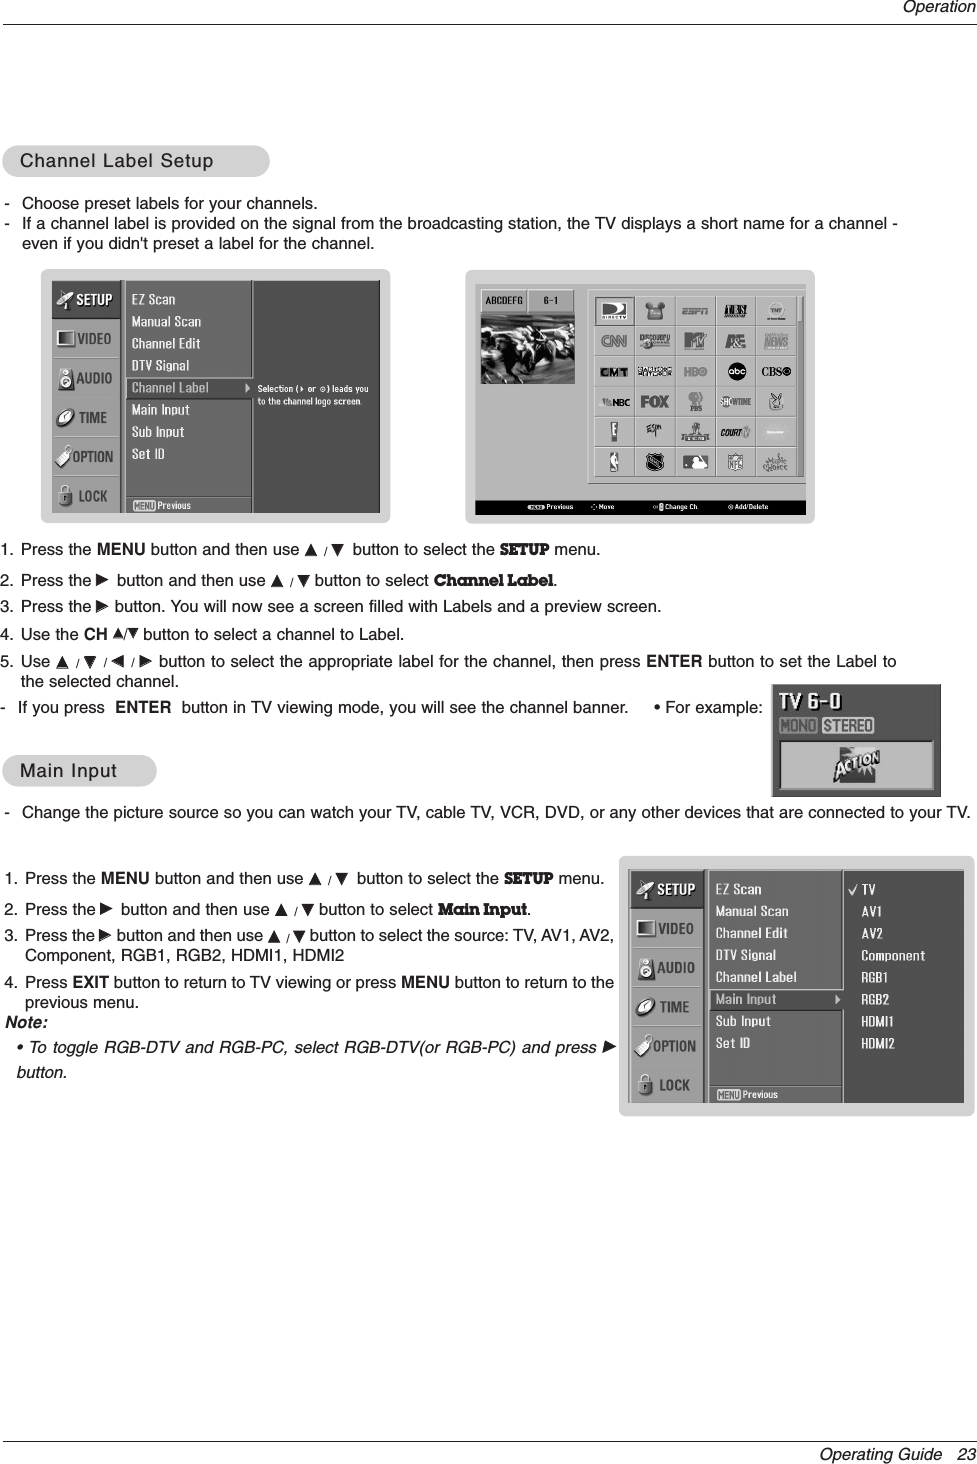 Operating Guide   23Operation- Change the picture source so you can watch your TV, cable TV, VCR, DVD, or any other devices that are connected to your TV. 1. Press the MENU button and then use DD  / EEbutton to select the SETUP menu.2. Press the GGbutton and then use DD  / EEbutton to select Main Input.3. Press the GGbutton and then use DD  / EEbutton to select the source: TV, AV1, AV2,Component, RGB1, RGB2, HDMI1, HDMI24. Press EXIT button to return to TV viewing or press MENU button to return to theprevious menu.Note:• To toggle RGB-DTV and RGB-PC, select RGB-DTV(or RGB-PC) and press GGbutton.Main InputMain Input- Choose preset labels for your channels. - If a channel label is provided on the signal from the broadcasting station, the TV displays a short name for a channel -even if you didn&apos;t preset a label for the channel.1. Press the MENU button and then use DD  / EEbutton to select the SETUP menu.2. Press the GGbutton and then use DD  / EEbutton to select Channel Label.3. Press the GGbutton. You will now see a screen filled with Labels and a preview screen.4. Use the CH DD/EEbutton to select a channel to Label. 5. Use DD  / EE/ FF  / GG  button to select the appropriate label for the channel, then press ENTER button to set the Label tothe selected channel.- If you press  ENTER button in TV viewing mode, you will see the channel banner.     • For example:Channel Label SetupChannel Label Setup